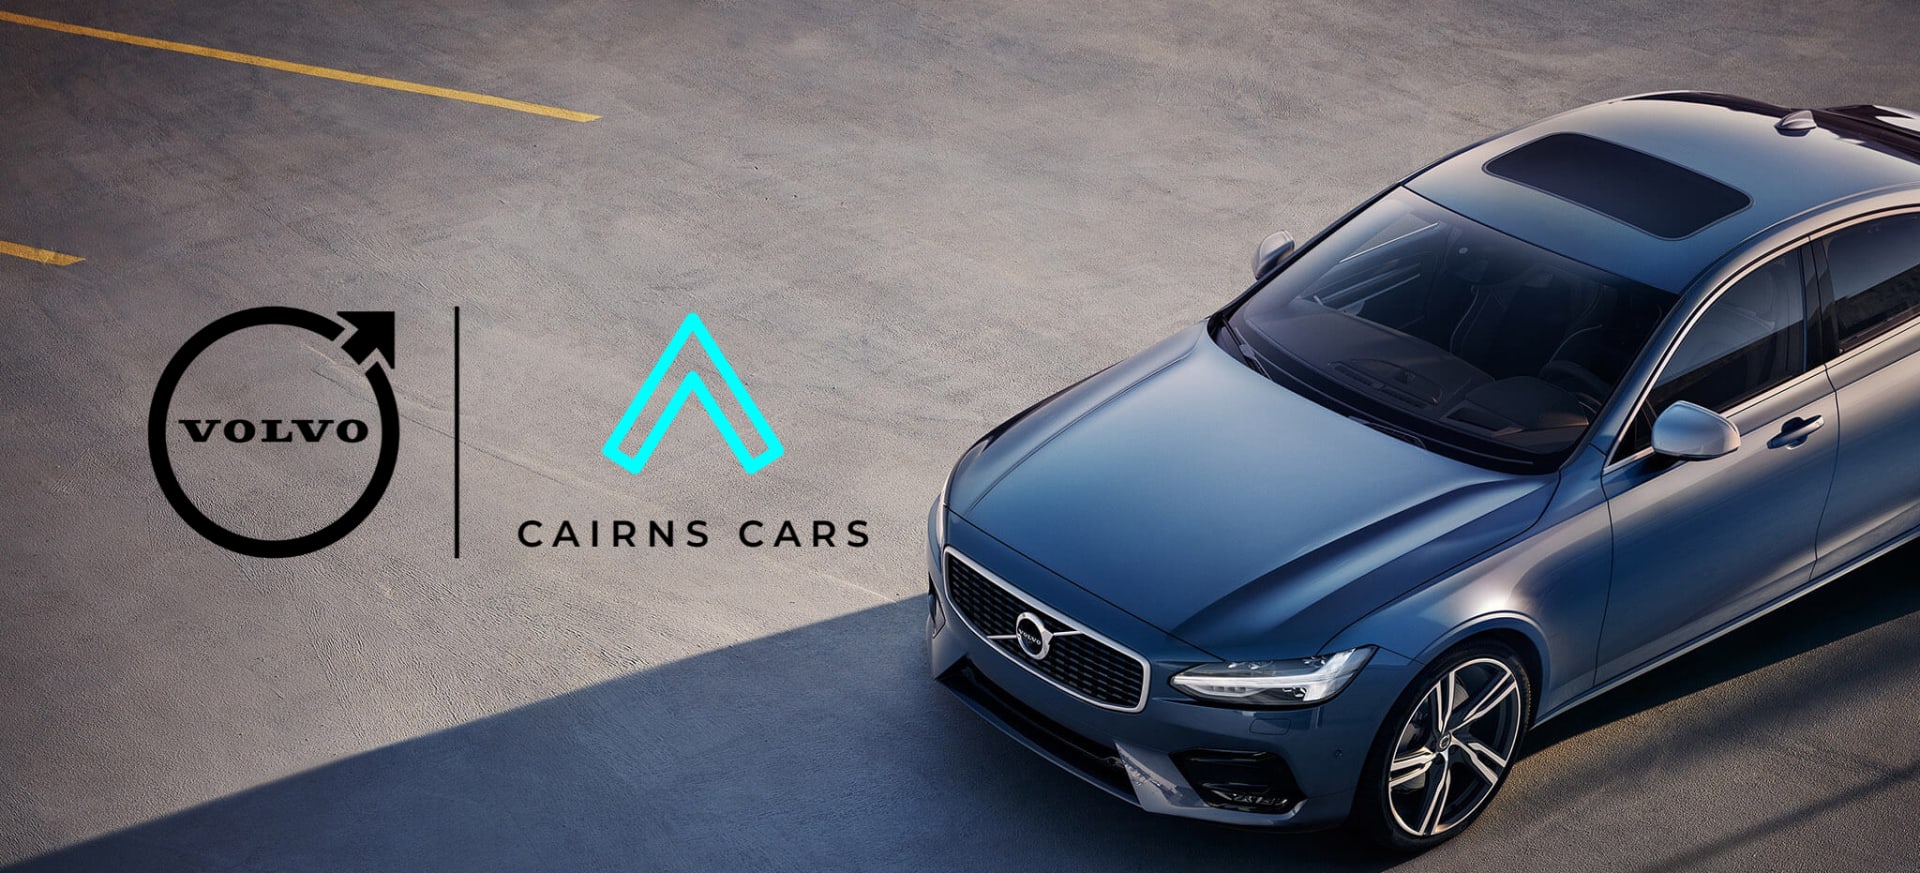 Volvo luxury vehicles now available at Cairns Cars